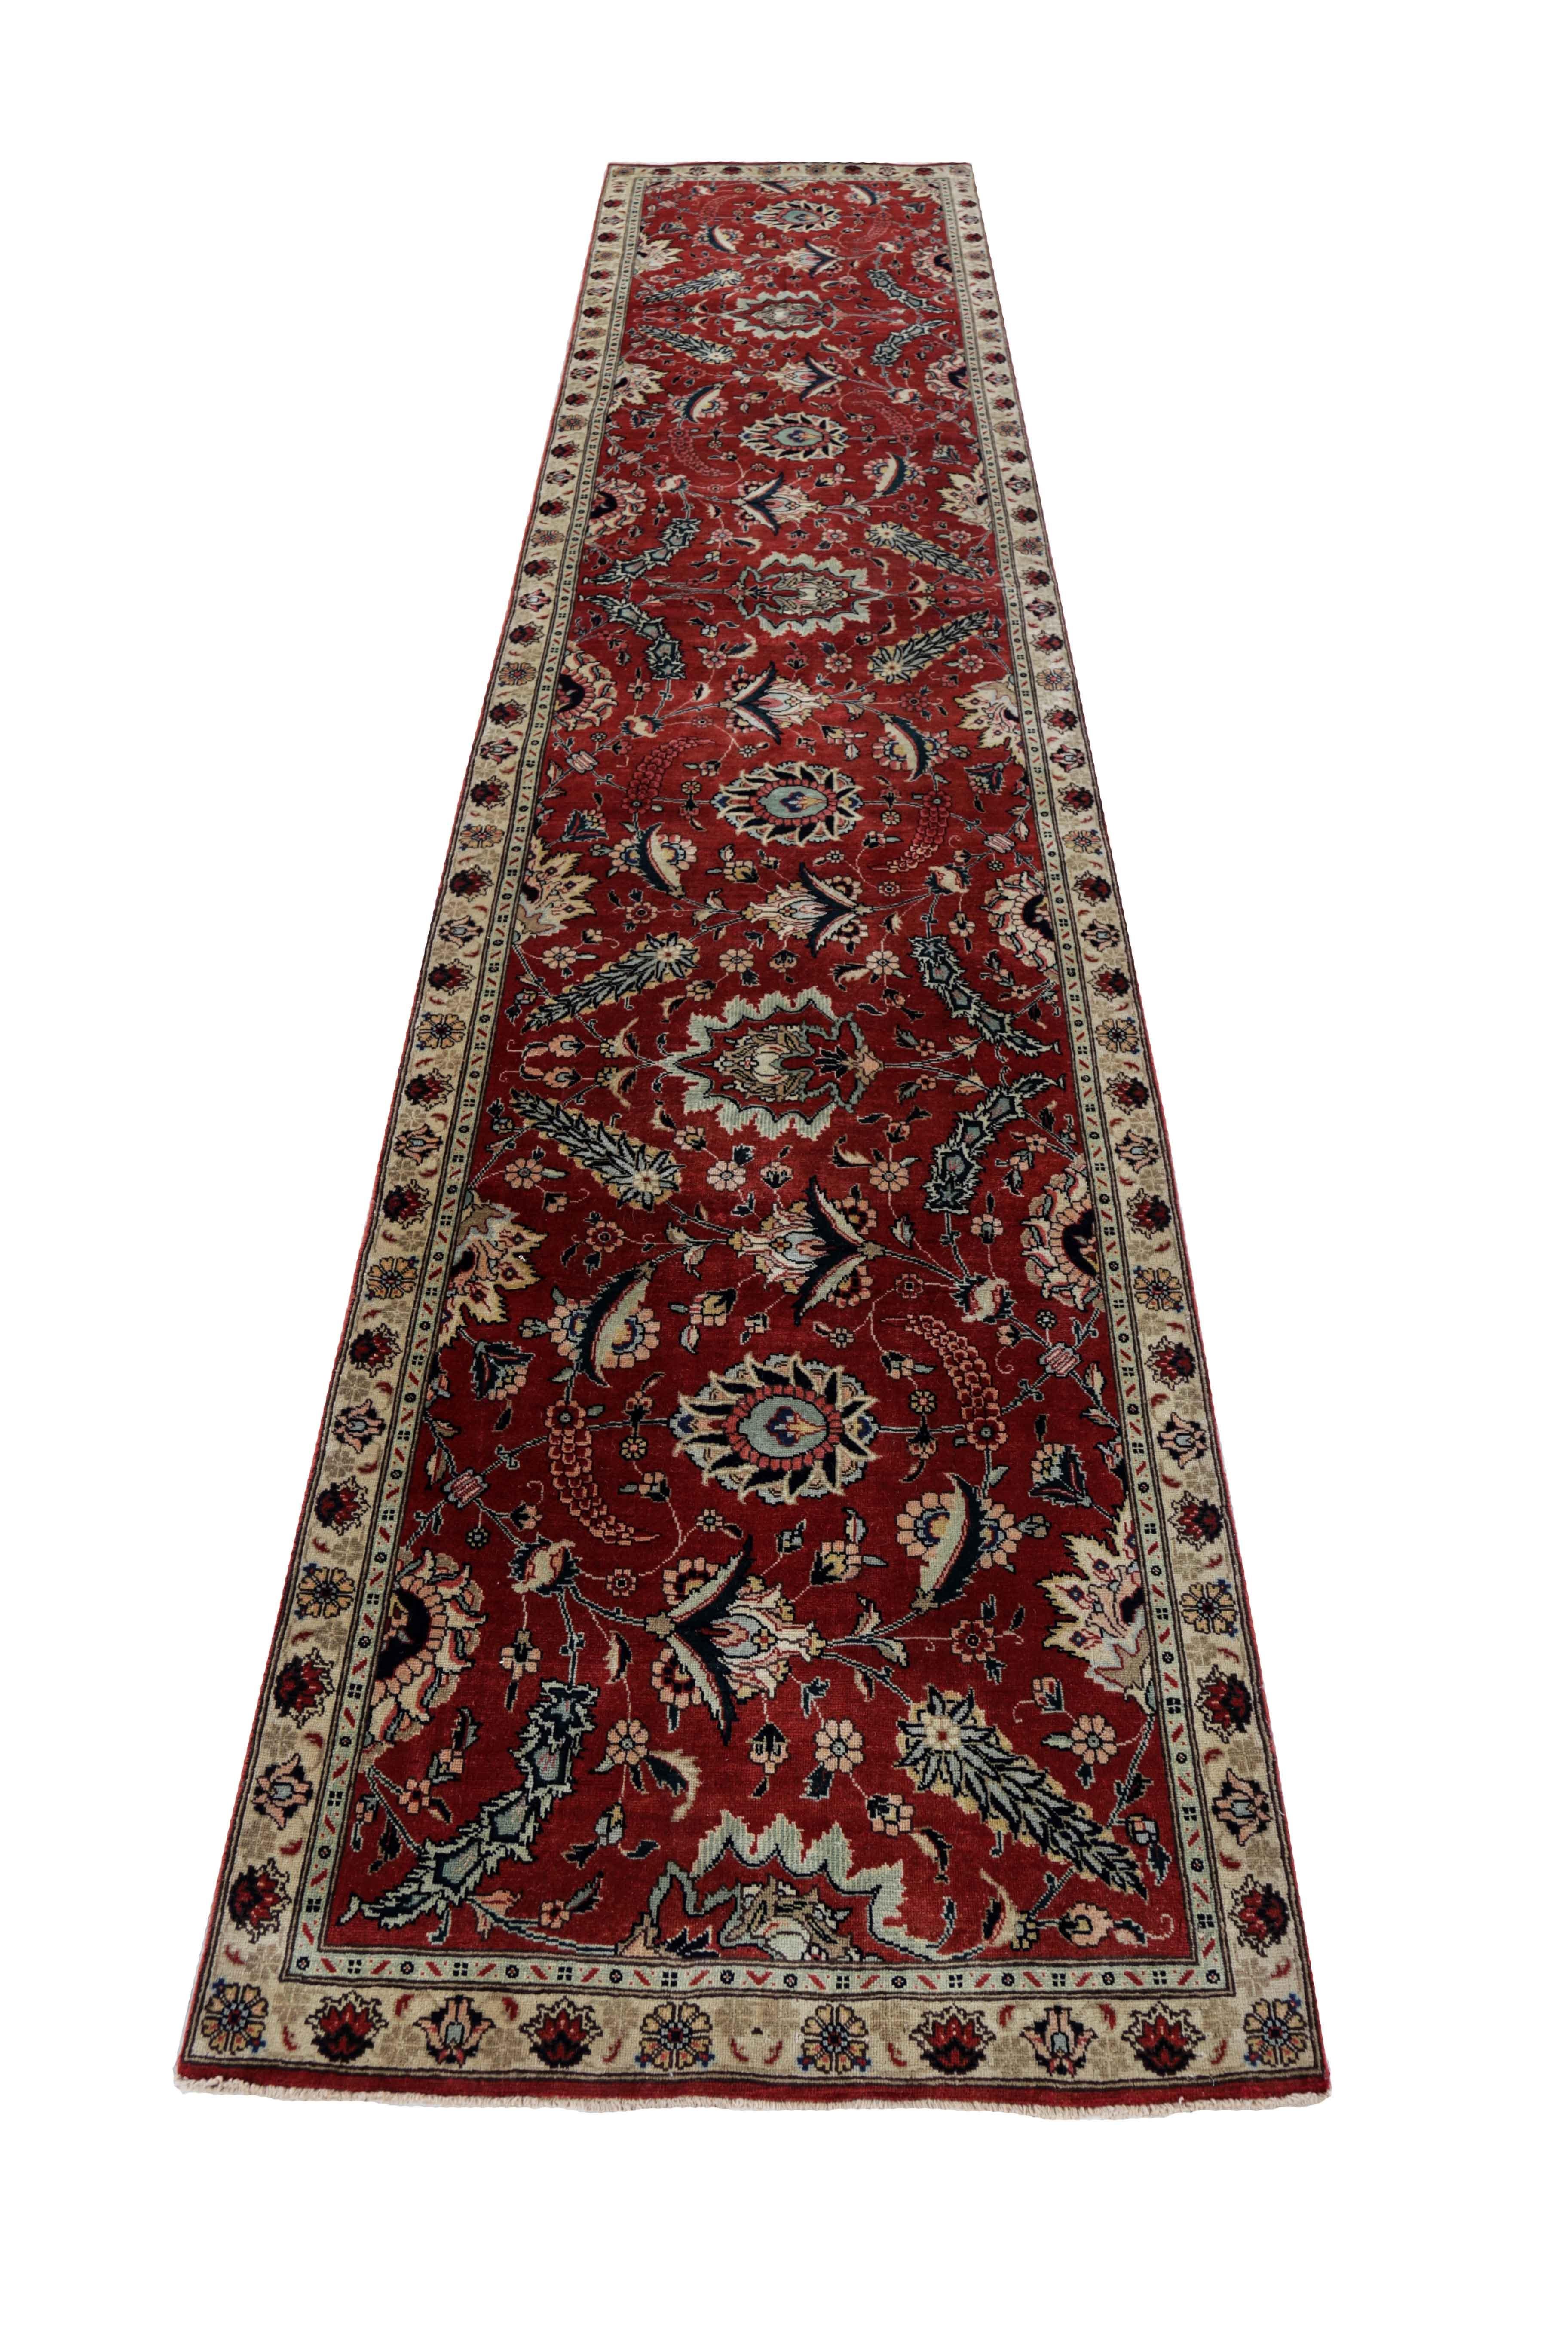 Antique Persian runner rug handwoven from the finest sheep’s wool. It’s colored with all-natural vegetable dyes that are safe for humans and pets. It’s a traditional Tabriz design handwoven by expert artisans. It’s a lovely runner rug that can be